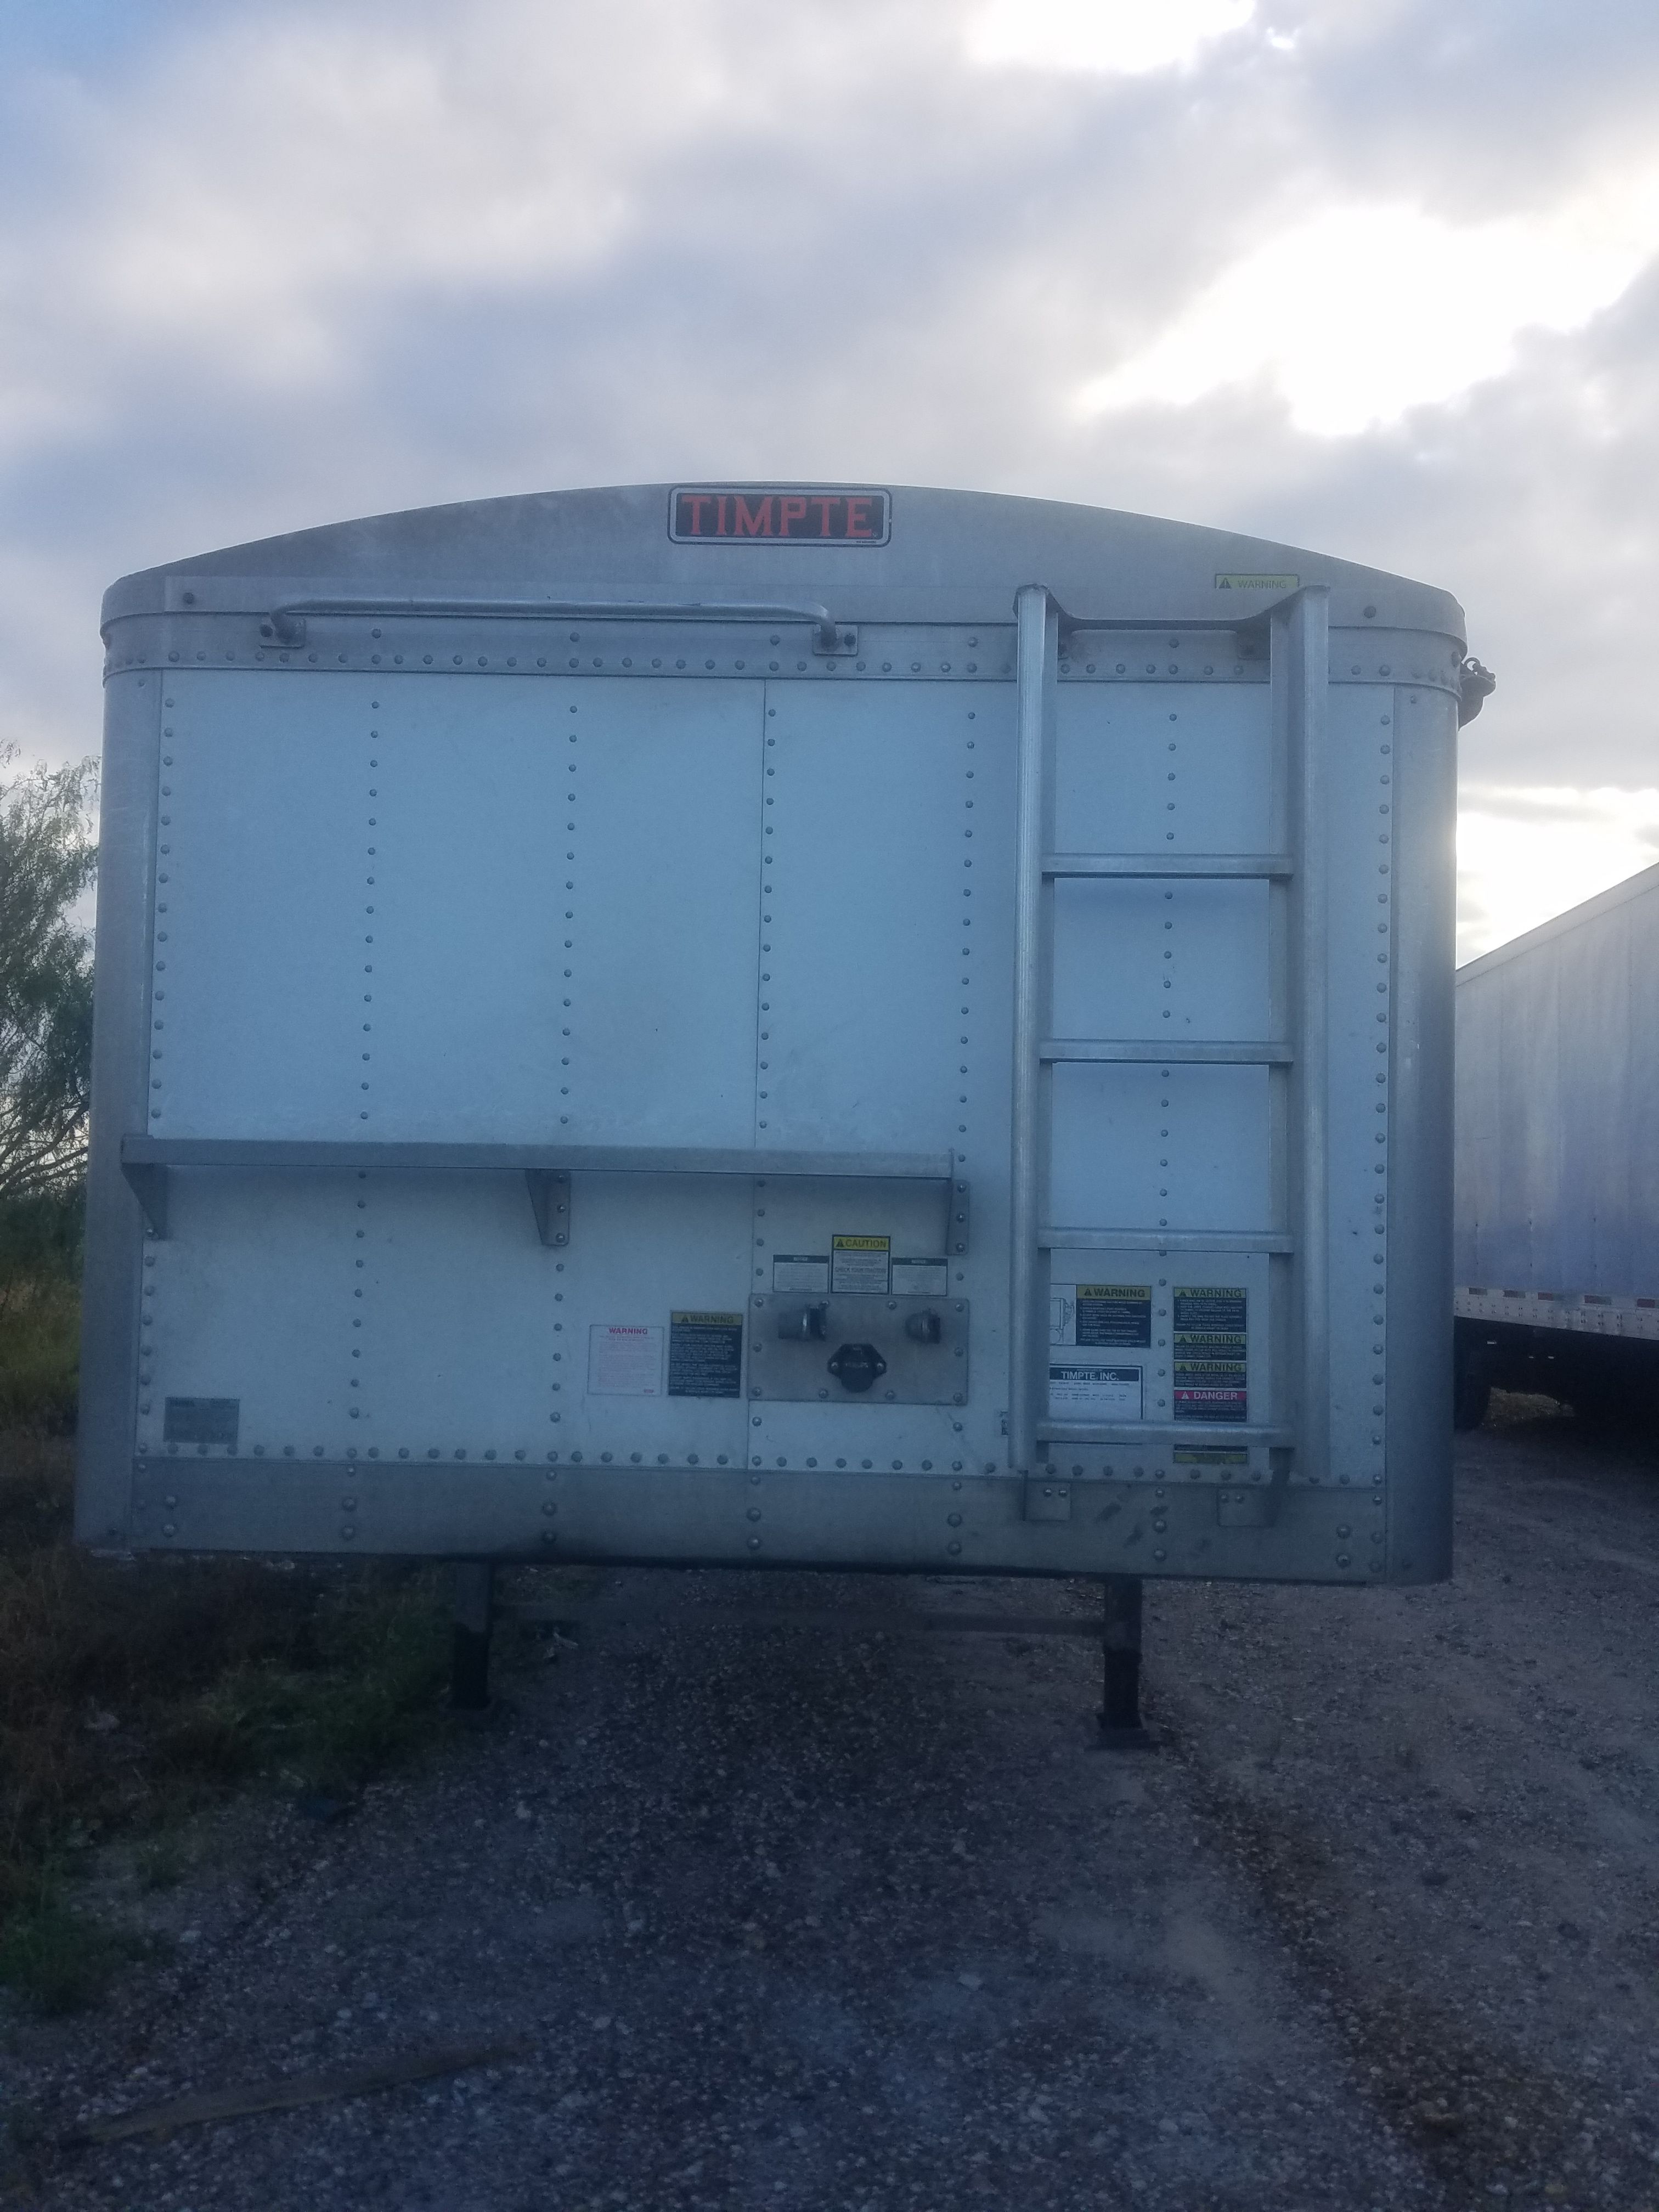 2015 Hopper for sale or rent